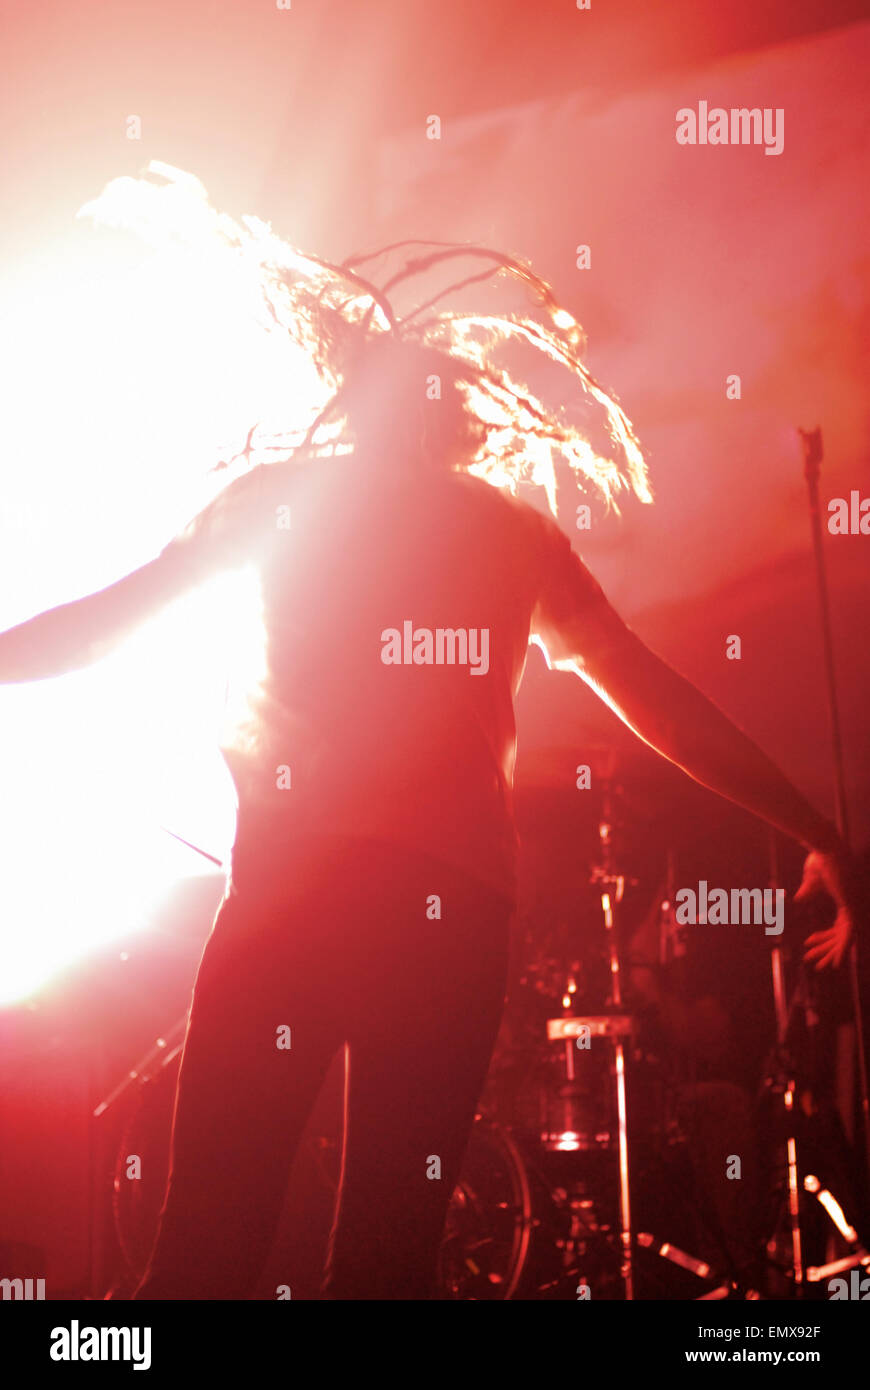 Back view of an anonymous or faceless rock star on stage, jumping, full of energy, surrounded by red stage lighting. Stock Photo